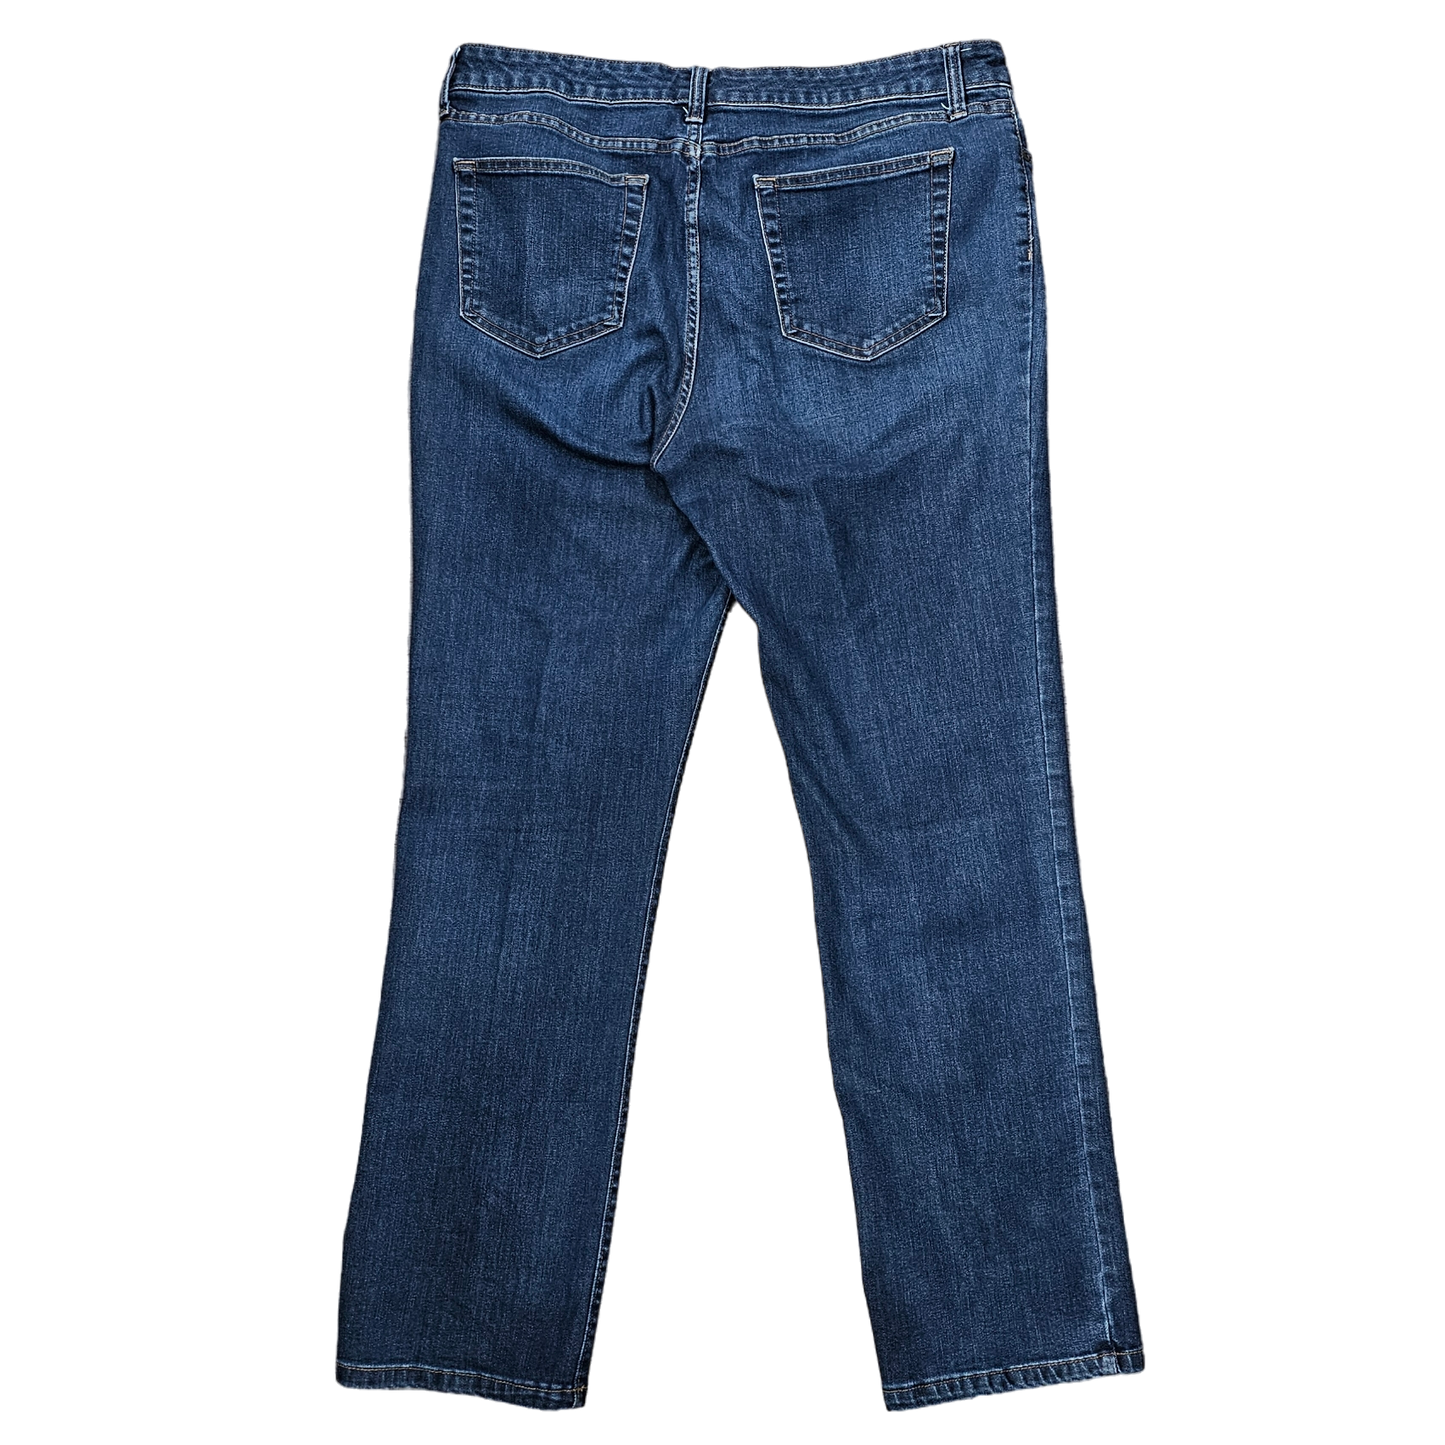 Jeans Straight By St Johns Bay  Size: 16